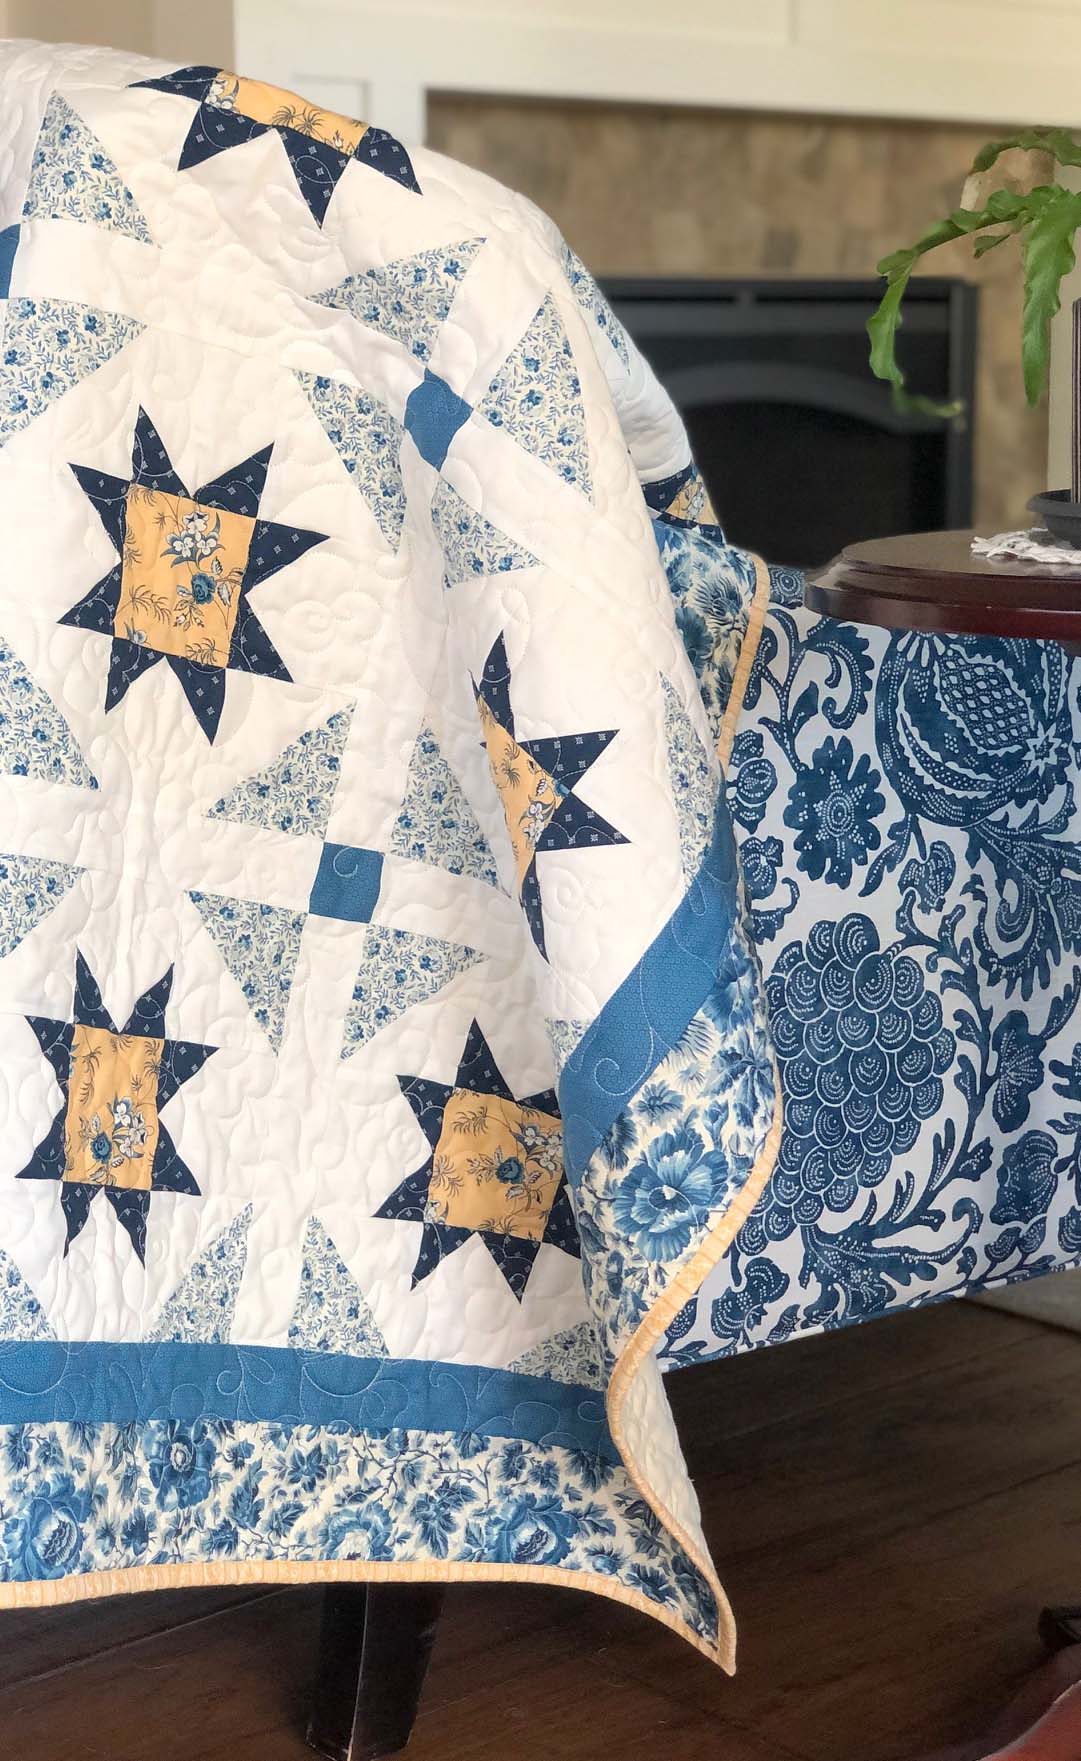 Crib size Sterling Quilt made and designed by Julie Cefalu @ The Crafty Quilter.  Fabric is from the Amelia's Blues collection from Moda Fabrics.